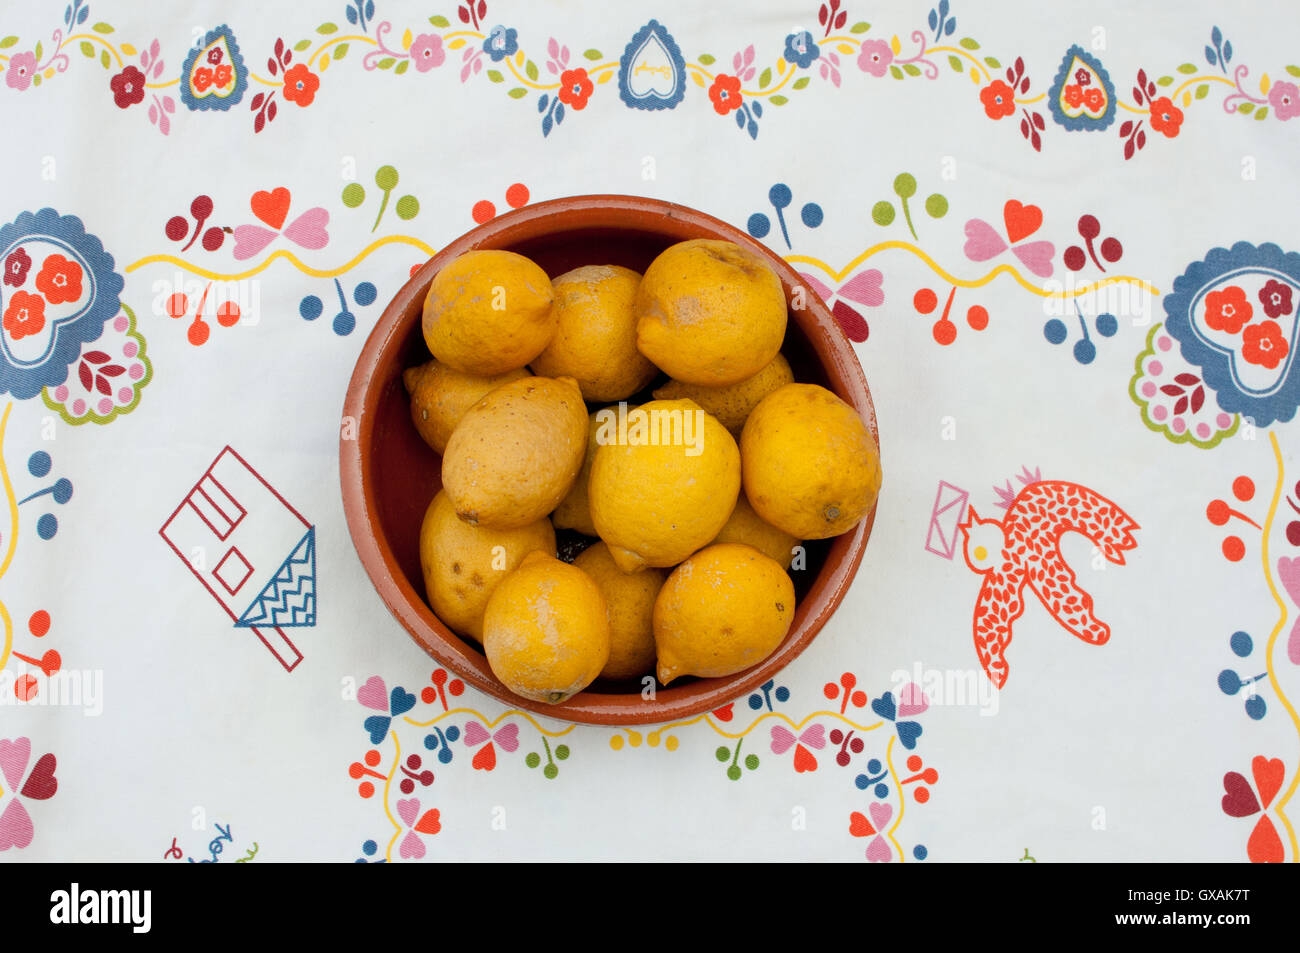 lemons in a bowl on a patterned tablecloth Stock Photo